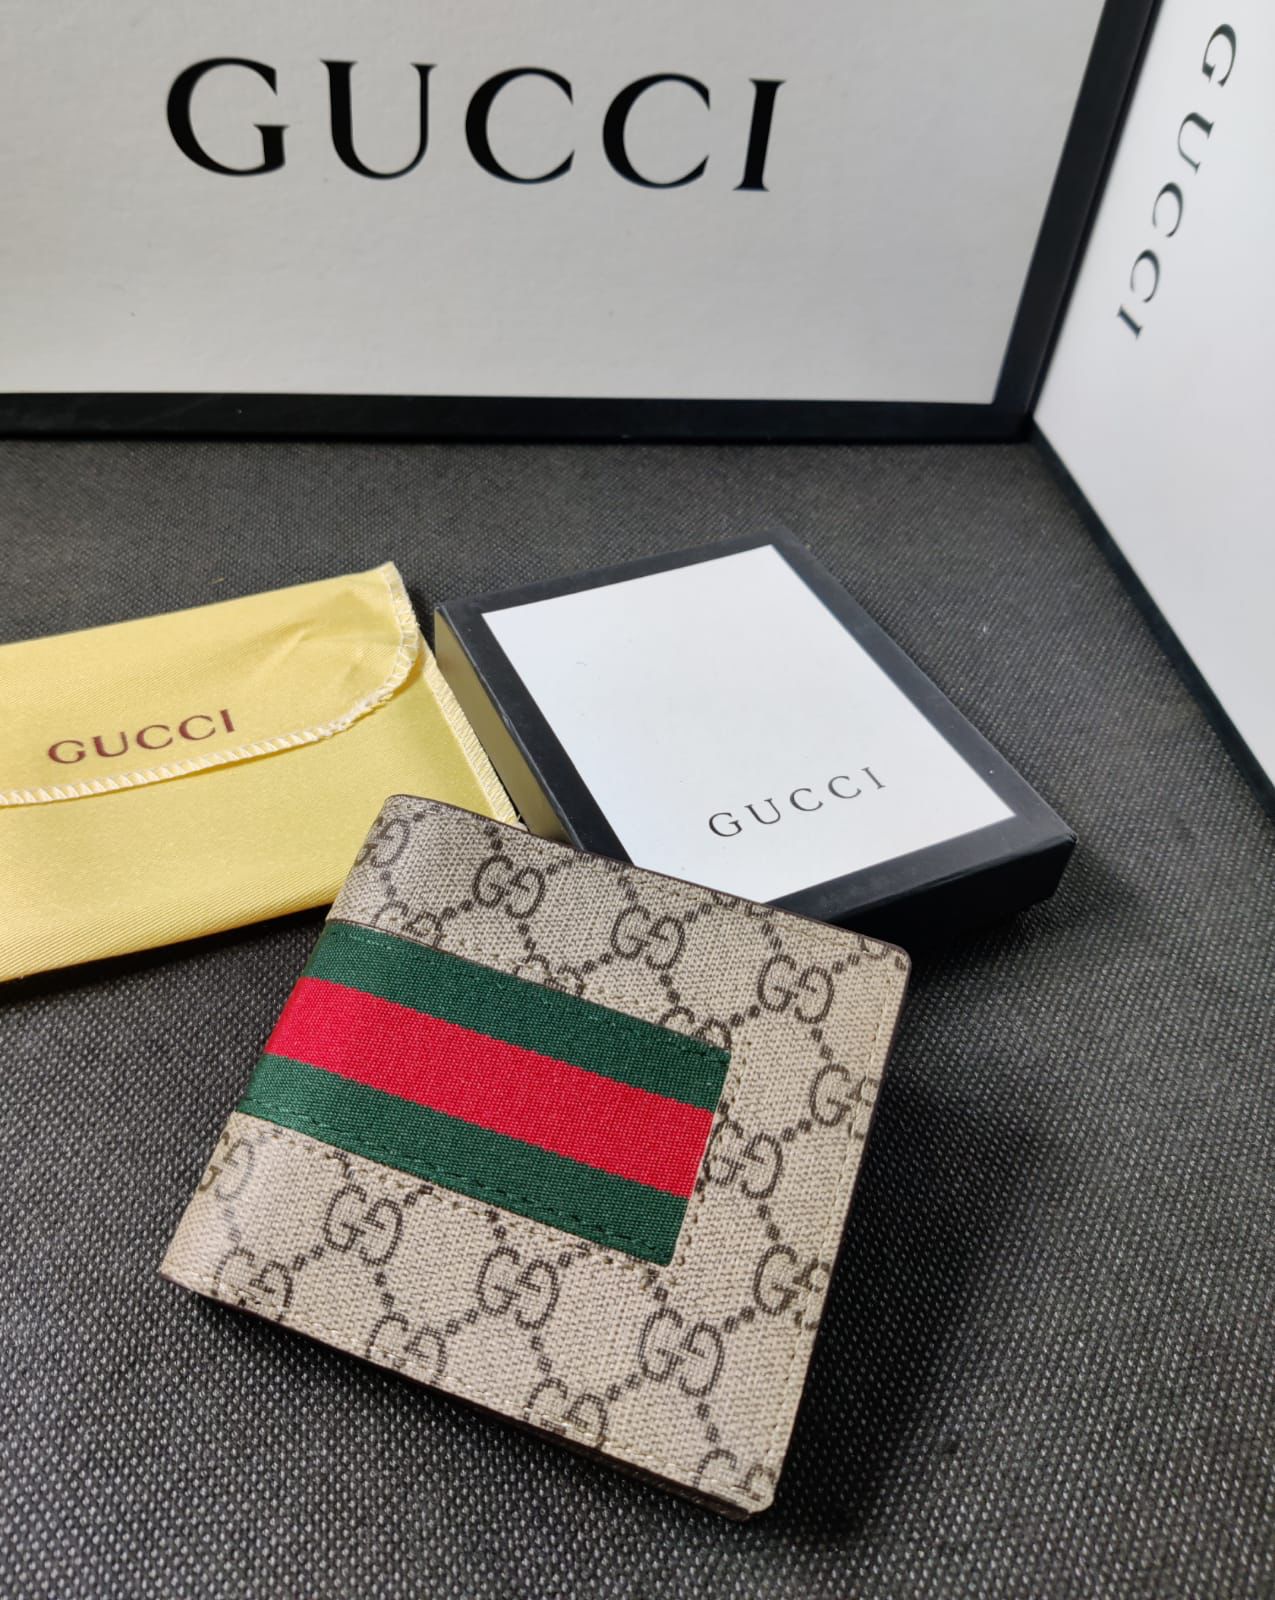 Gucci Made In Italy Coffee Color Men's Wallet For Man Coffee Big Gg Leather Gift Wallet Gucci Design Print GC-B-1695